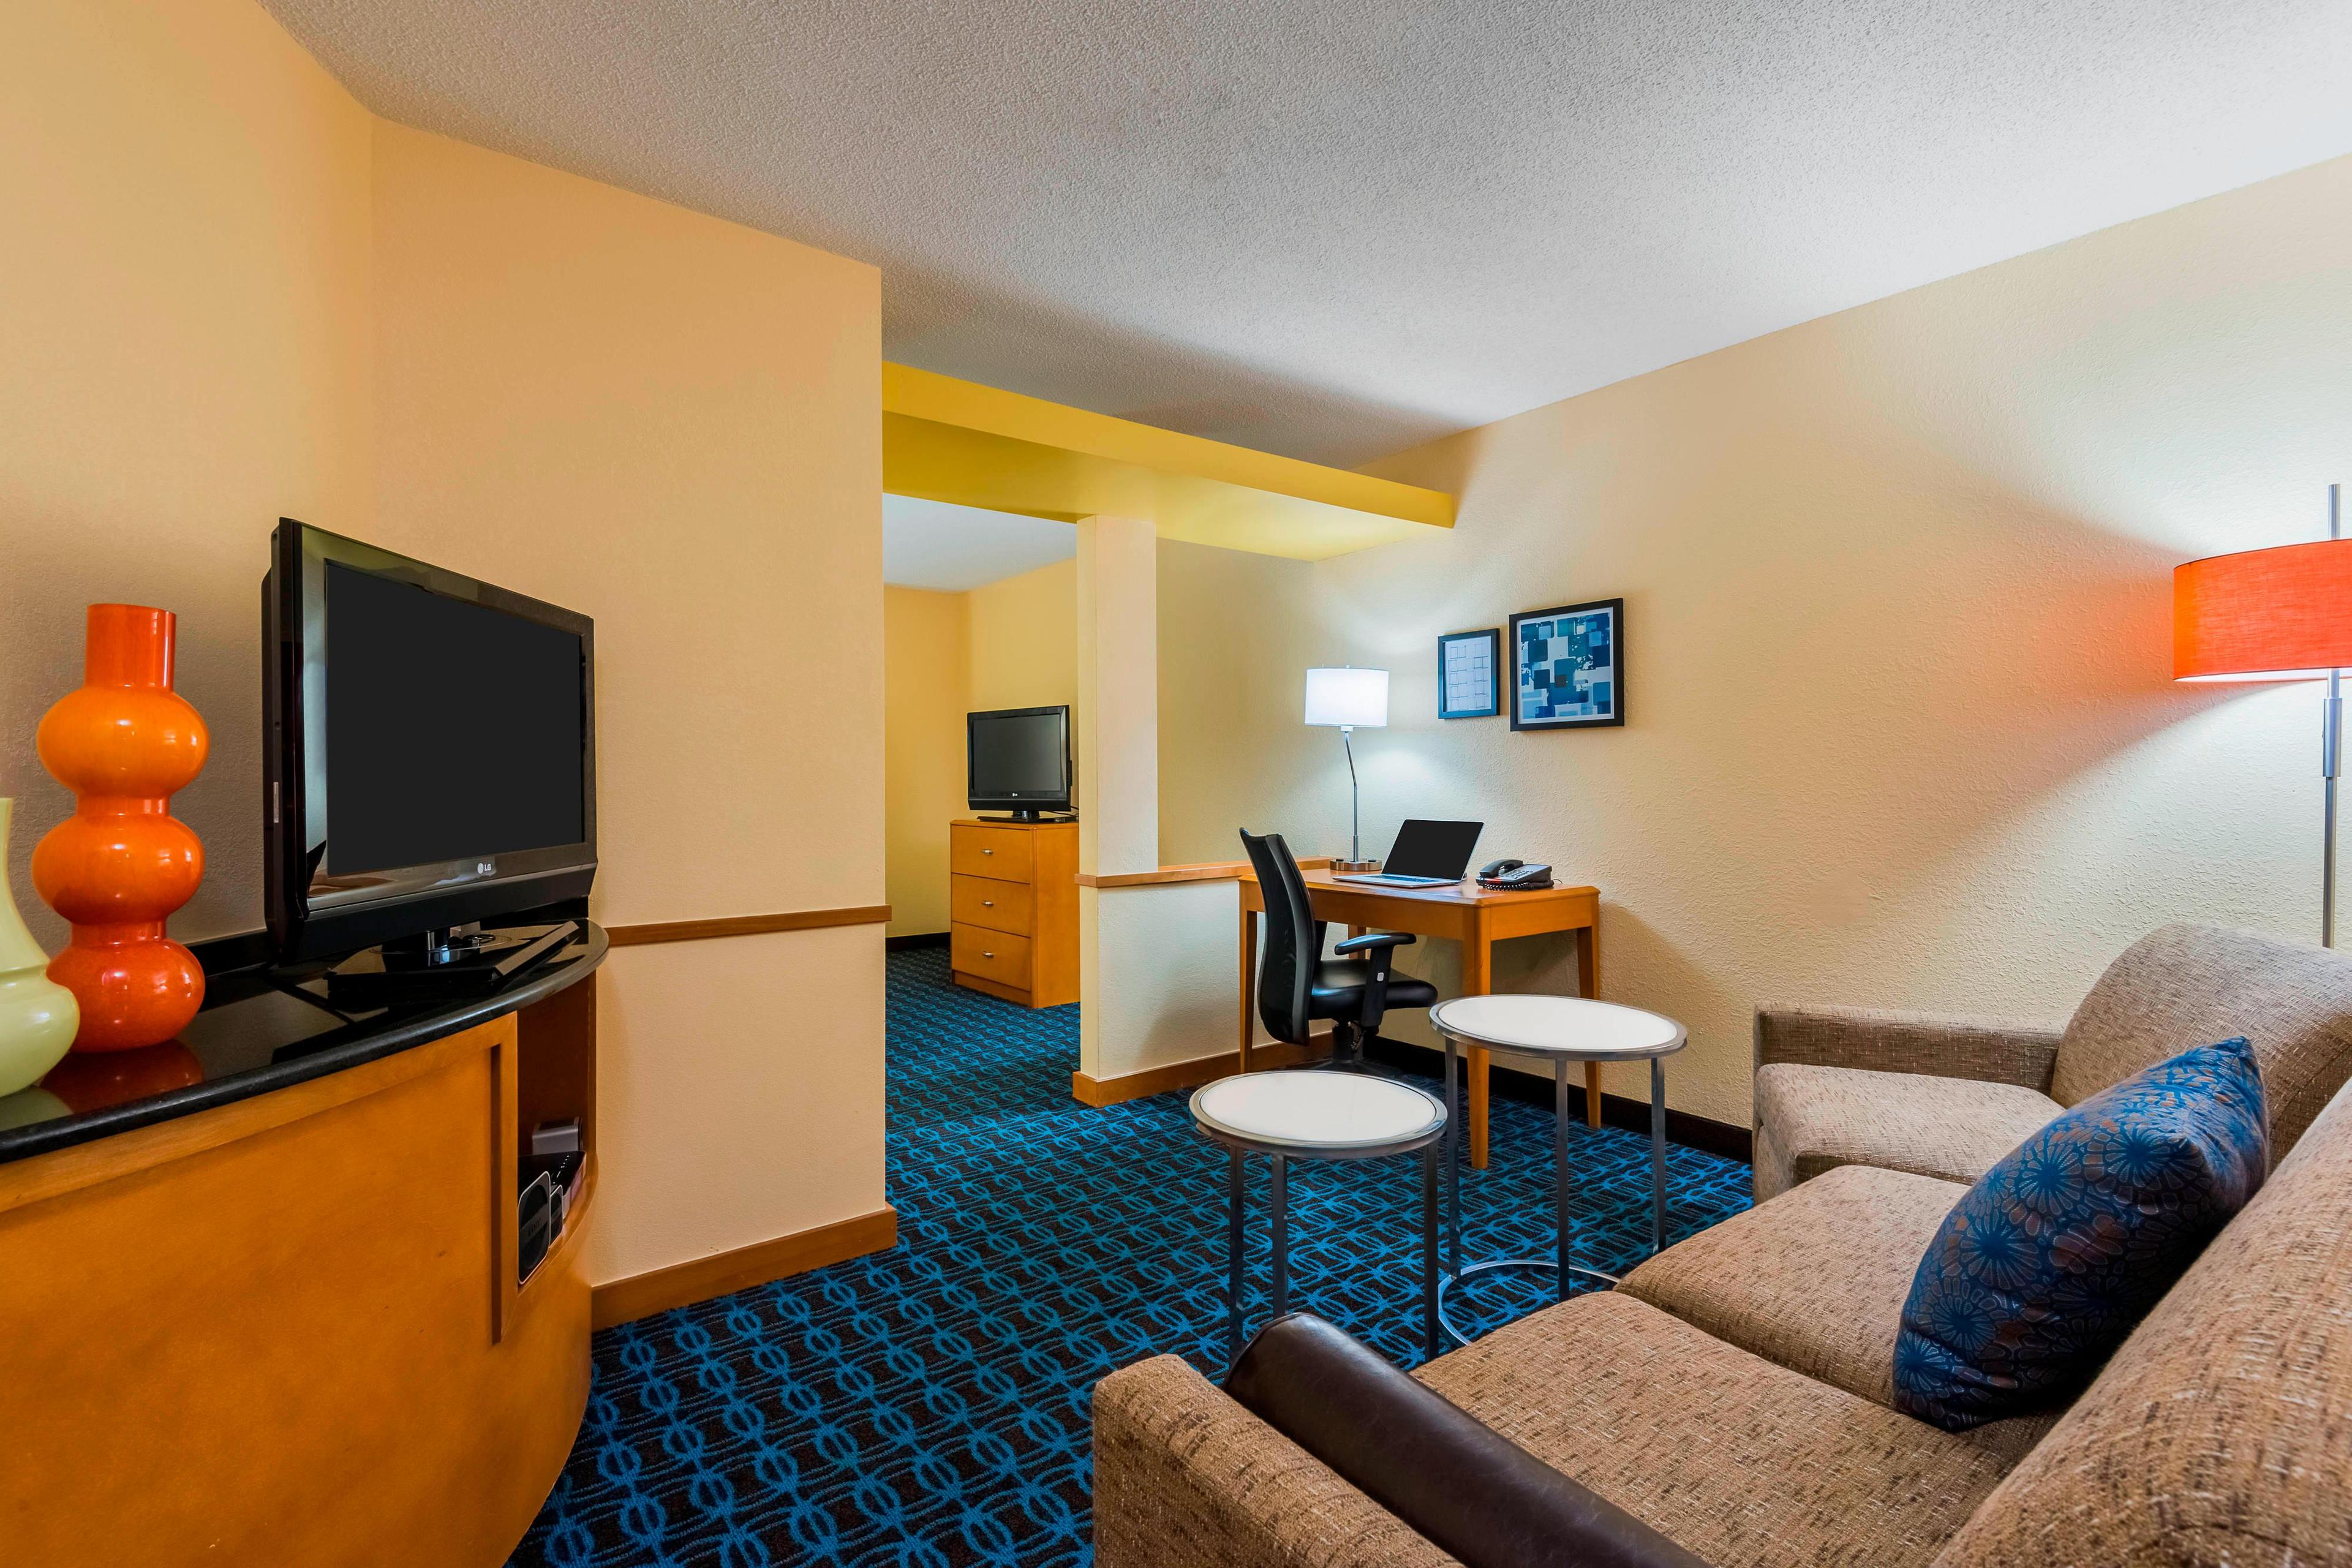 Experience one of our King Suites during your stay! This spacious King Suite offers all the conveniences of home, including a separate area for sleeping and living. Take advantage of the complimentary high-speed Internet access and enjoy the flat panel HDTVs!